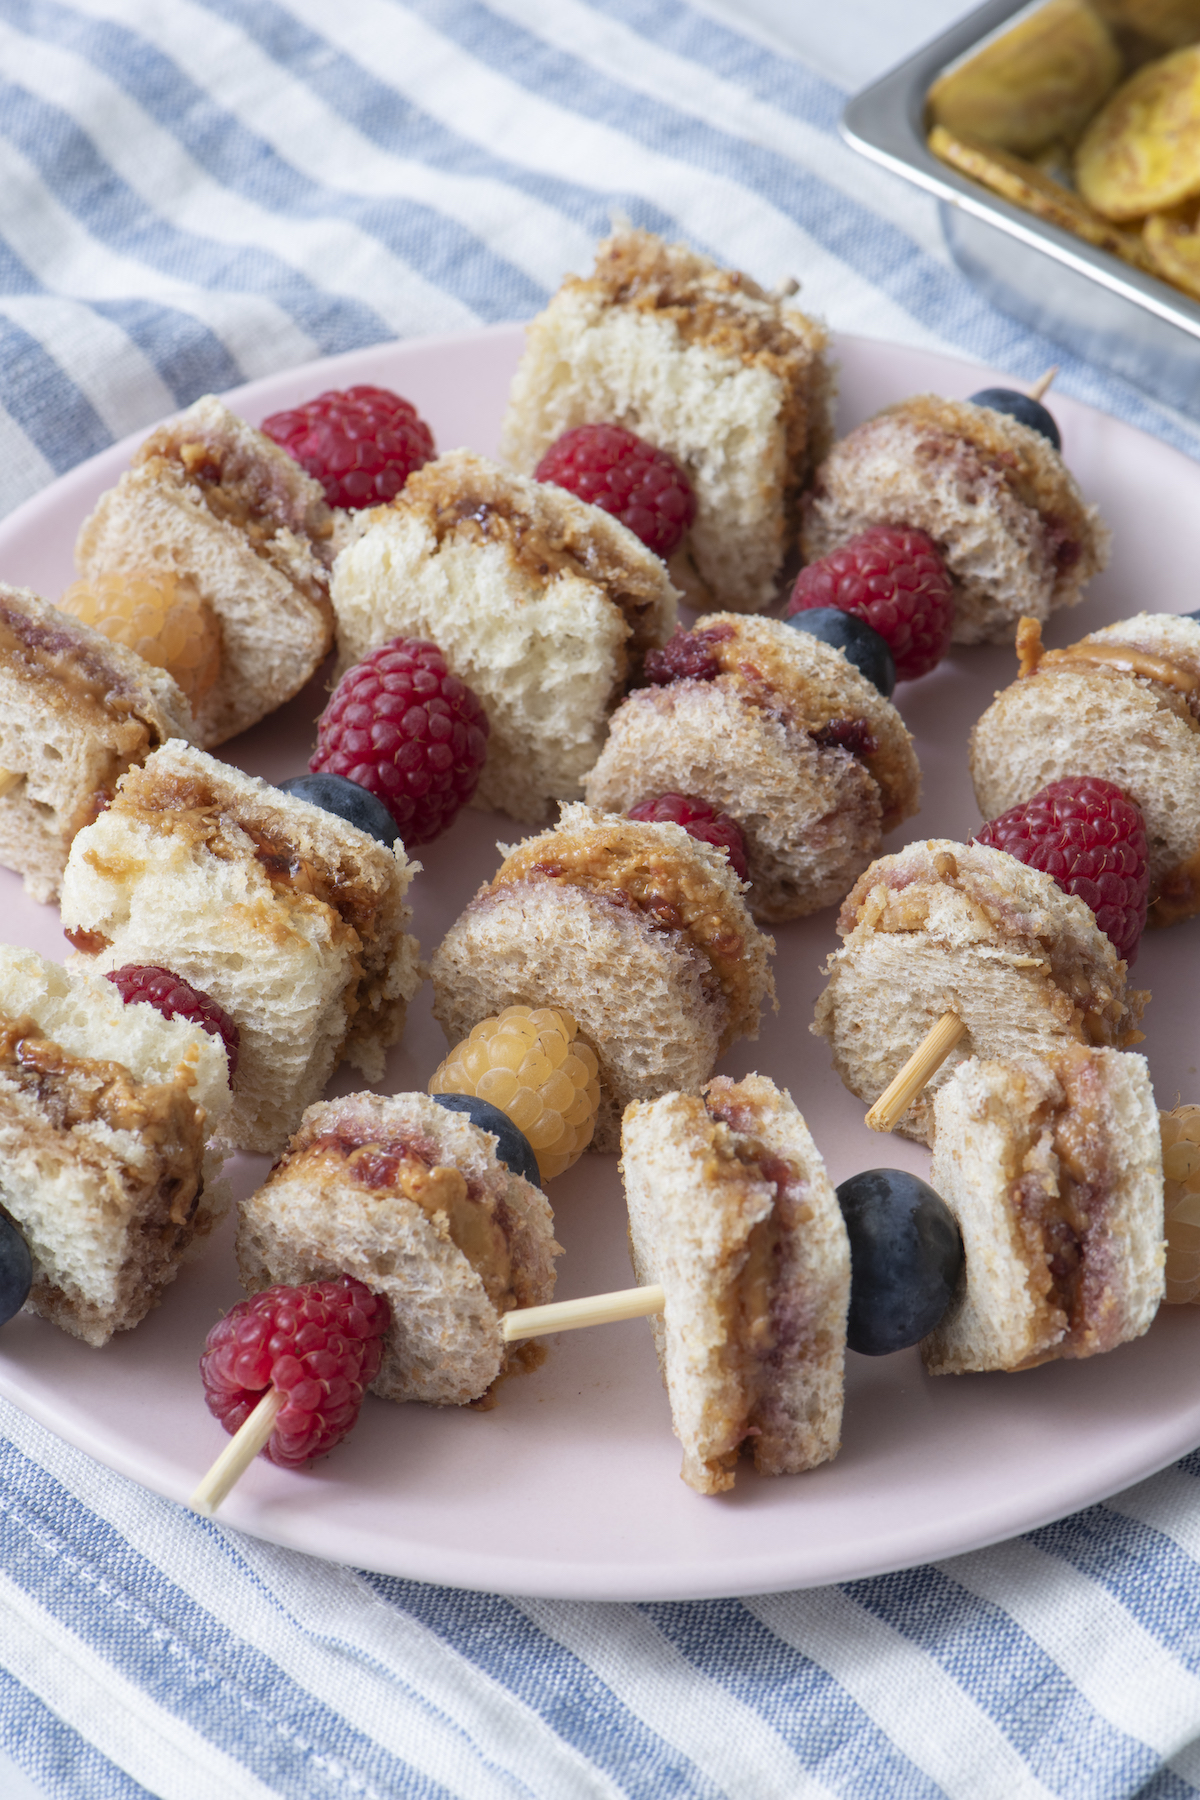 peanut butter and jelly skewers with berries